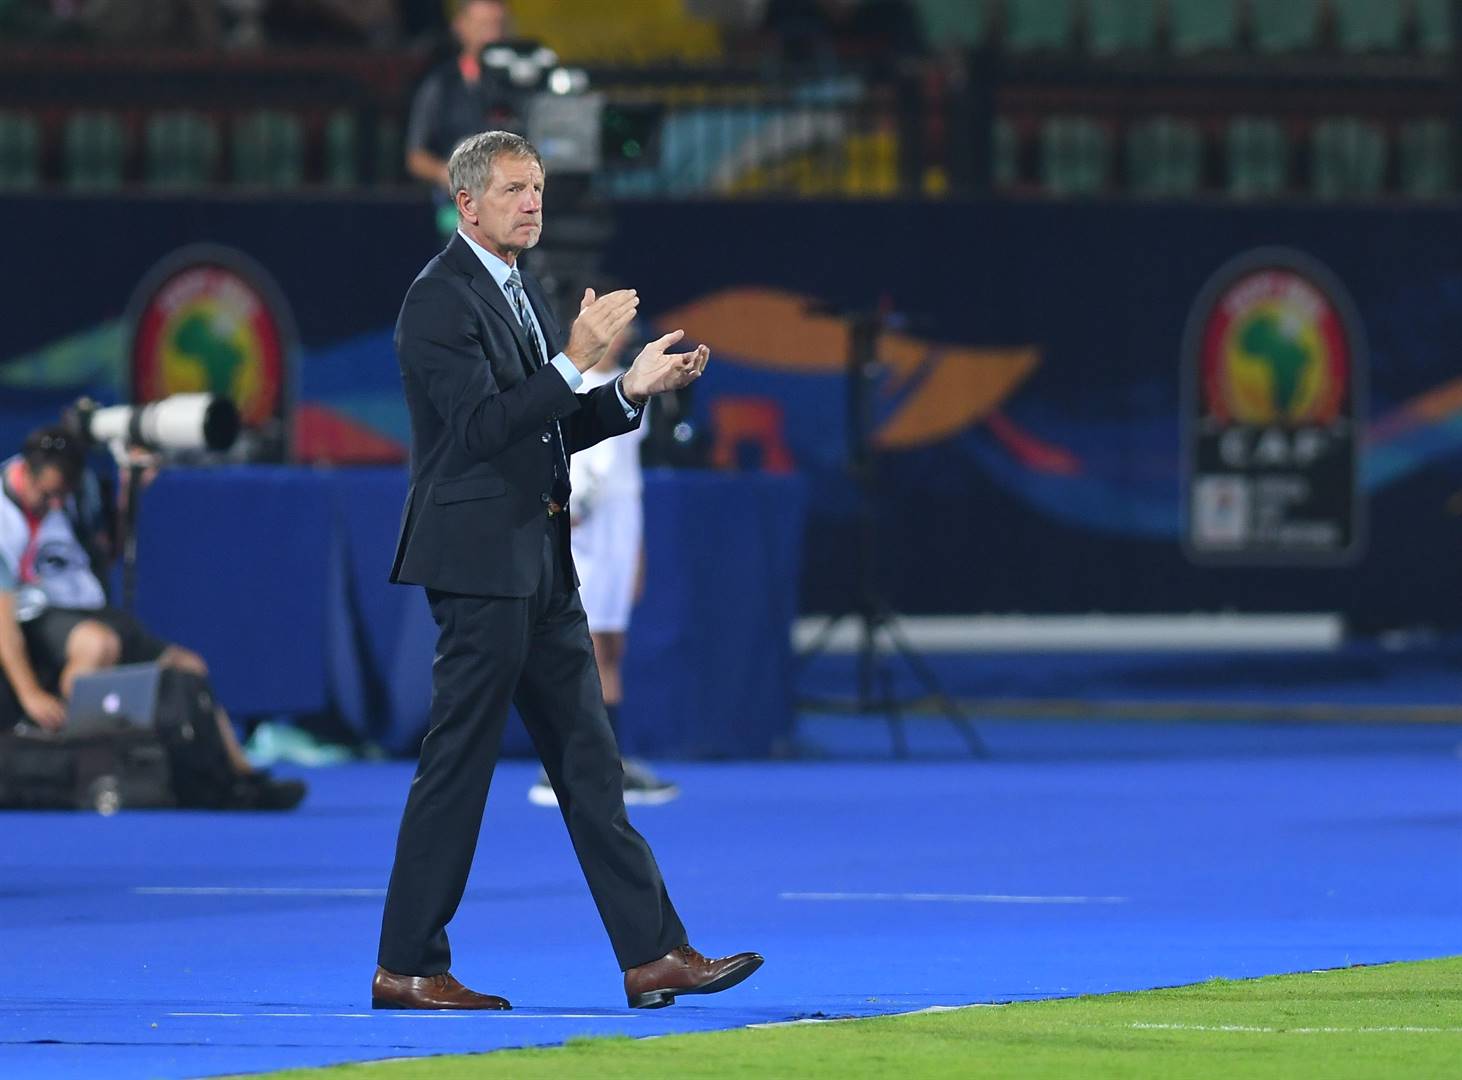 Stuart Baxter during the African Cup of Nations match between South Africa and Namibia at Al-Salam Stadium on Sunday (June 28 2019) in Cairo, Egypt. Picture: Ahmed Hasan/Gallo Images